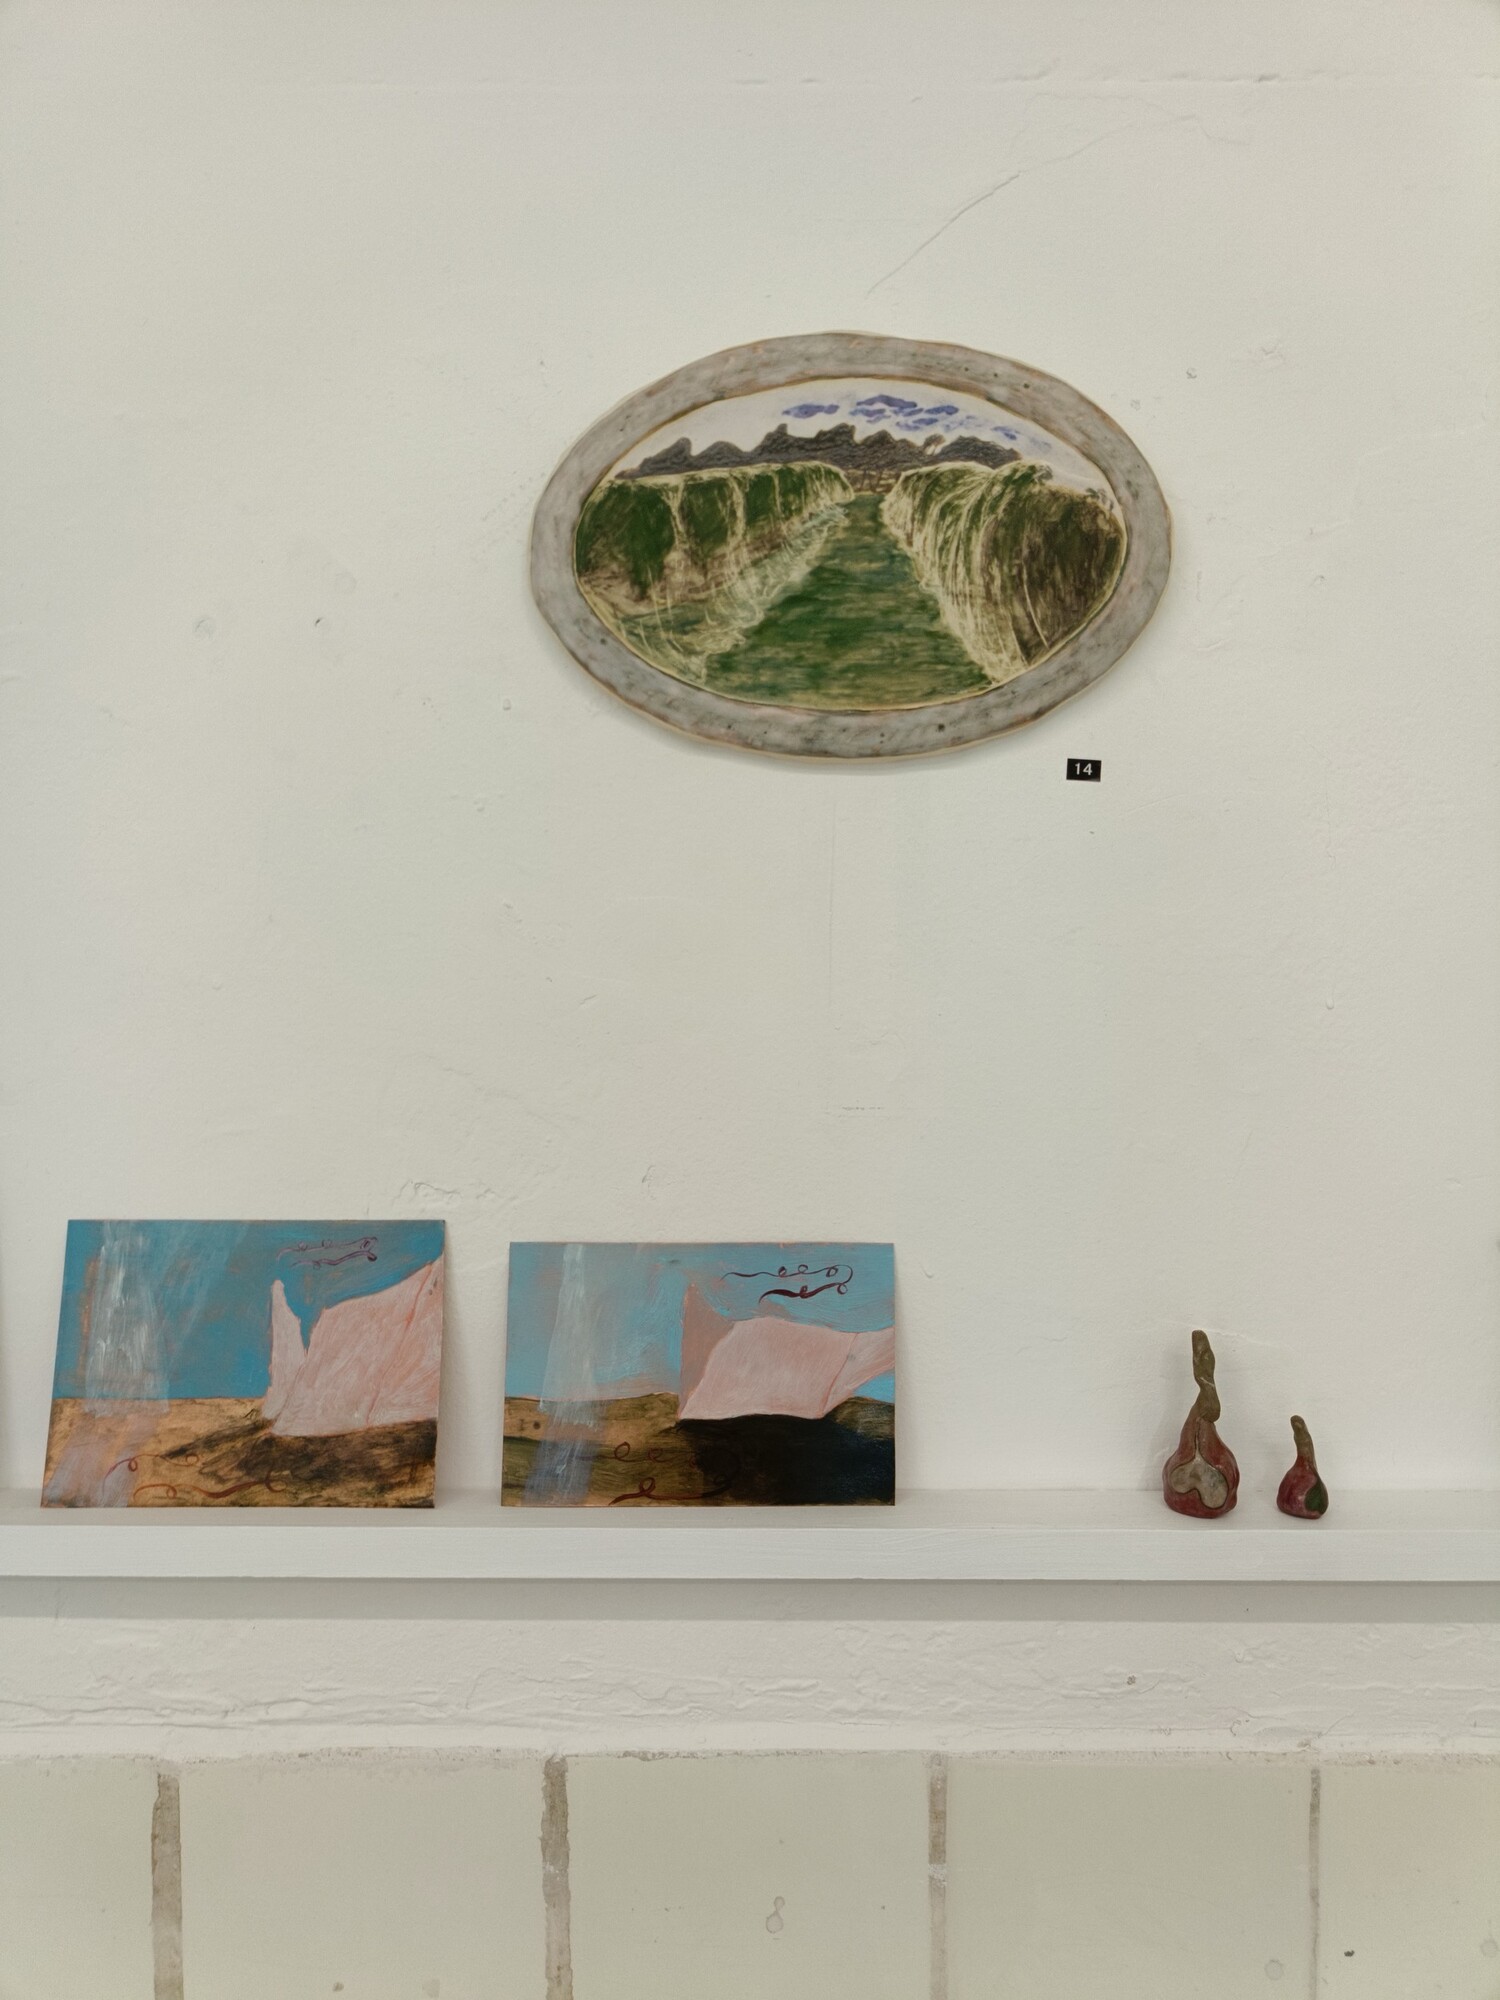 From left to right: Viola Nazario, Netting (1) and Netting (2), 2024, oil on copper sheet, Tiles Lewisham, Sydney. Benita Laylim, Orchard bride, 2024, oxide, stain, glaze on clay, Tiles Lewisham, Sydney. Photo: courtesy of the gallery.